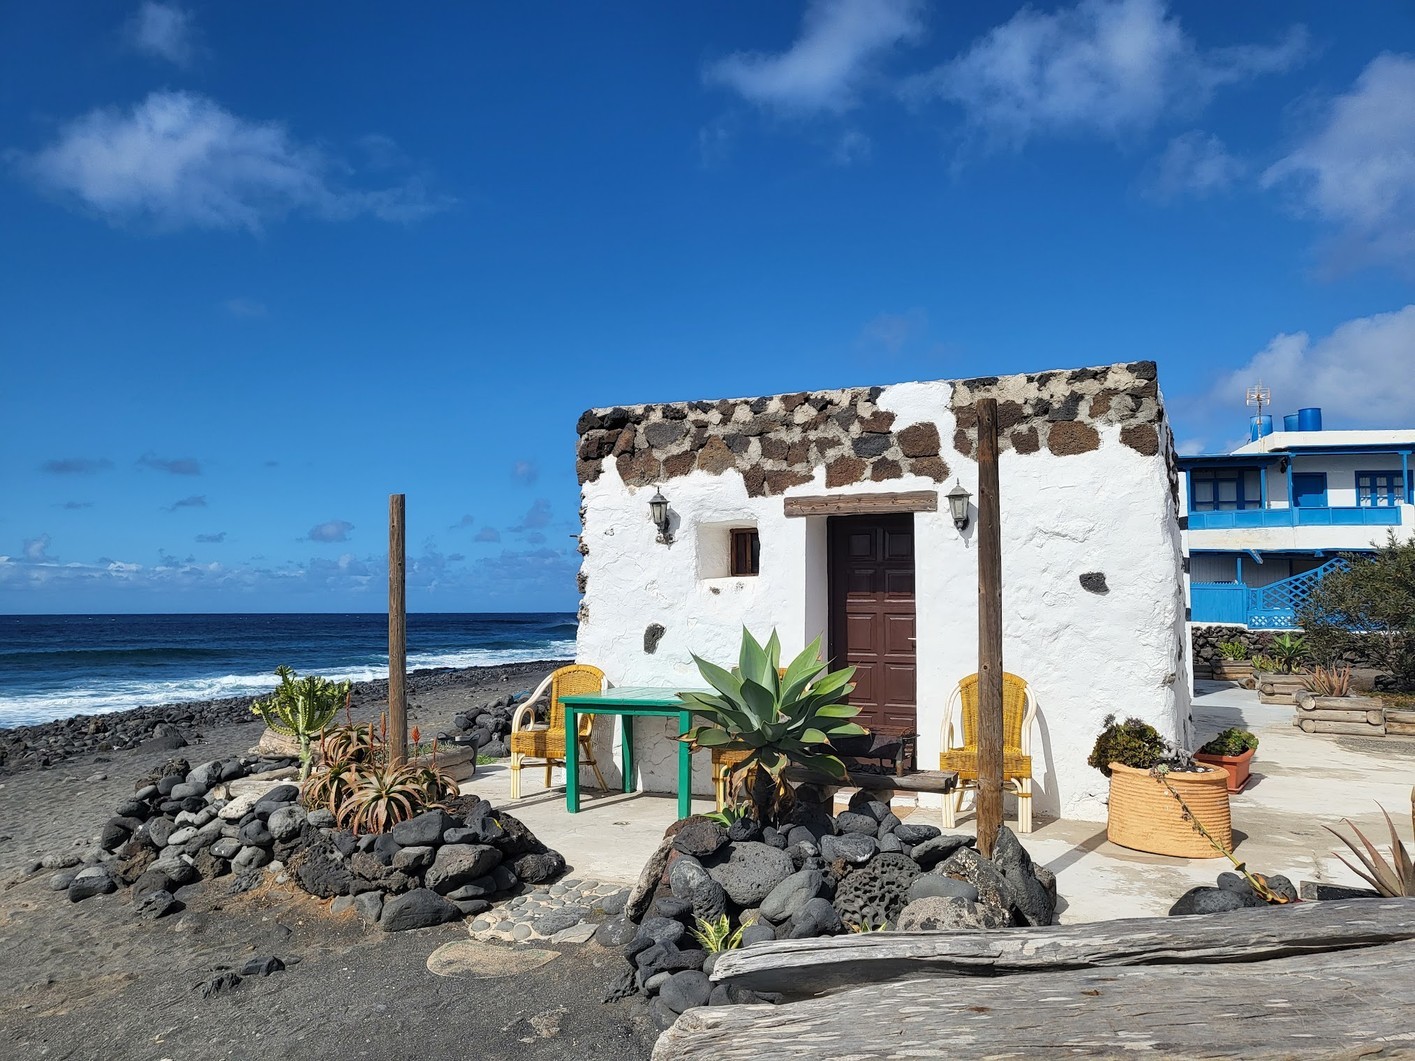 El Golfo, what to see in lanzarote